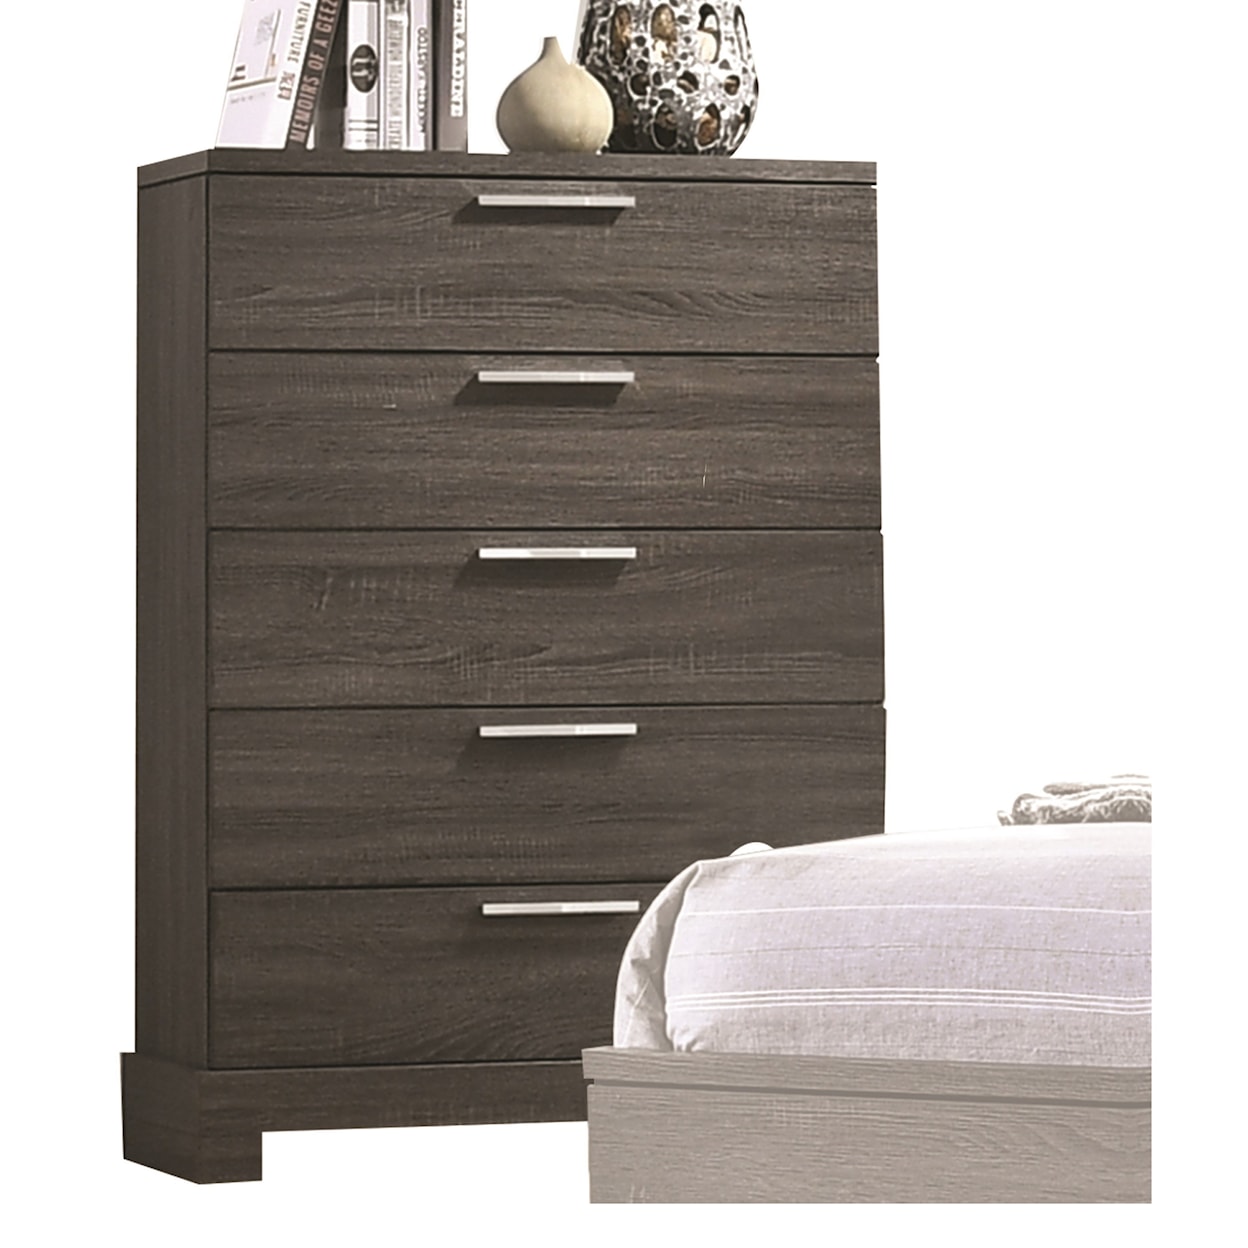 Acme Furniture Lantha Chest of Drawers